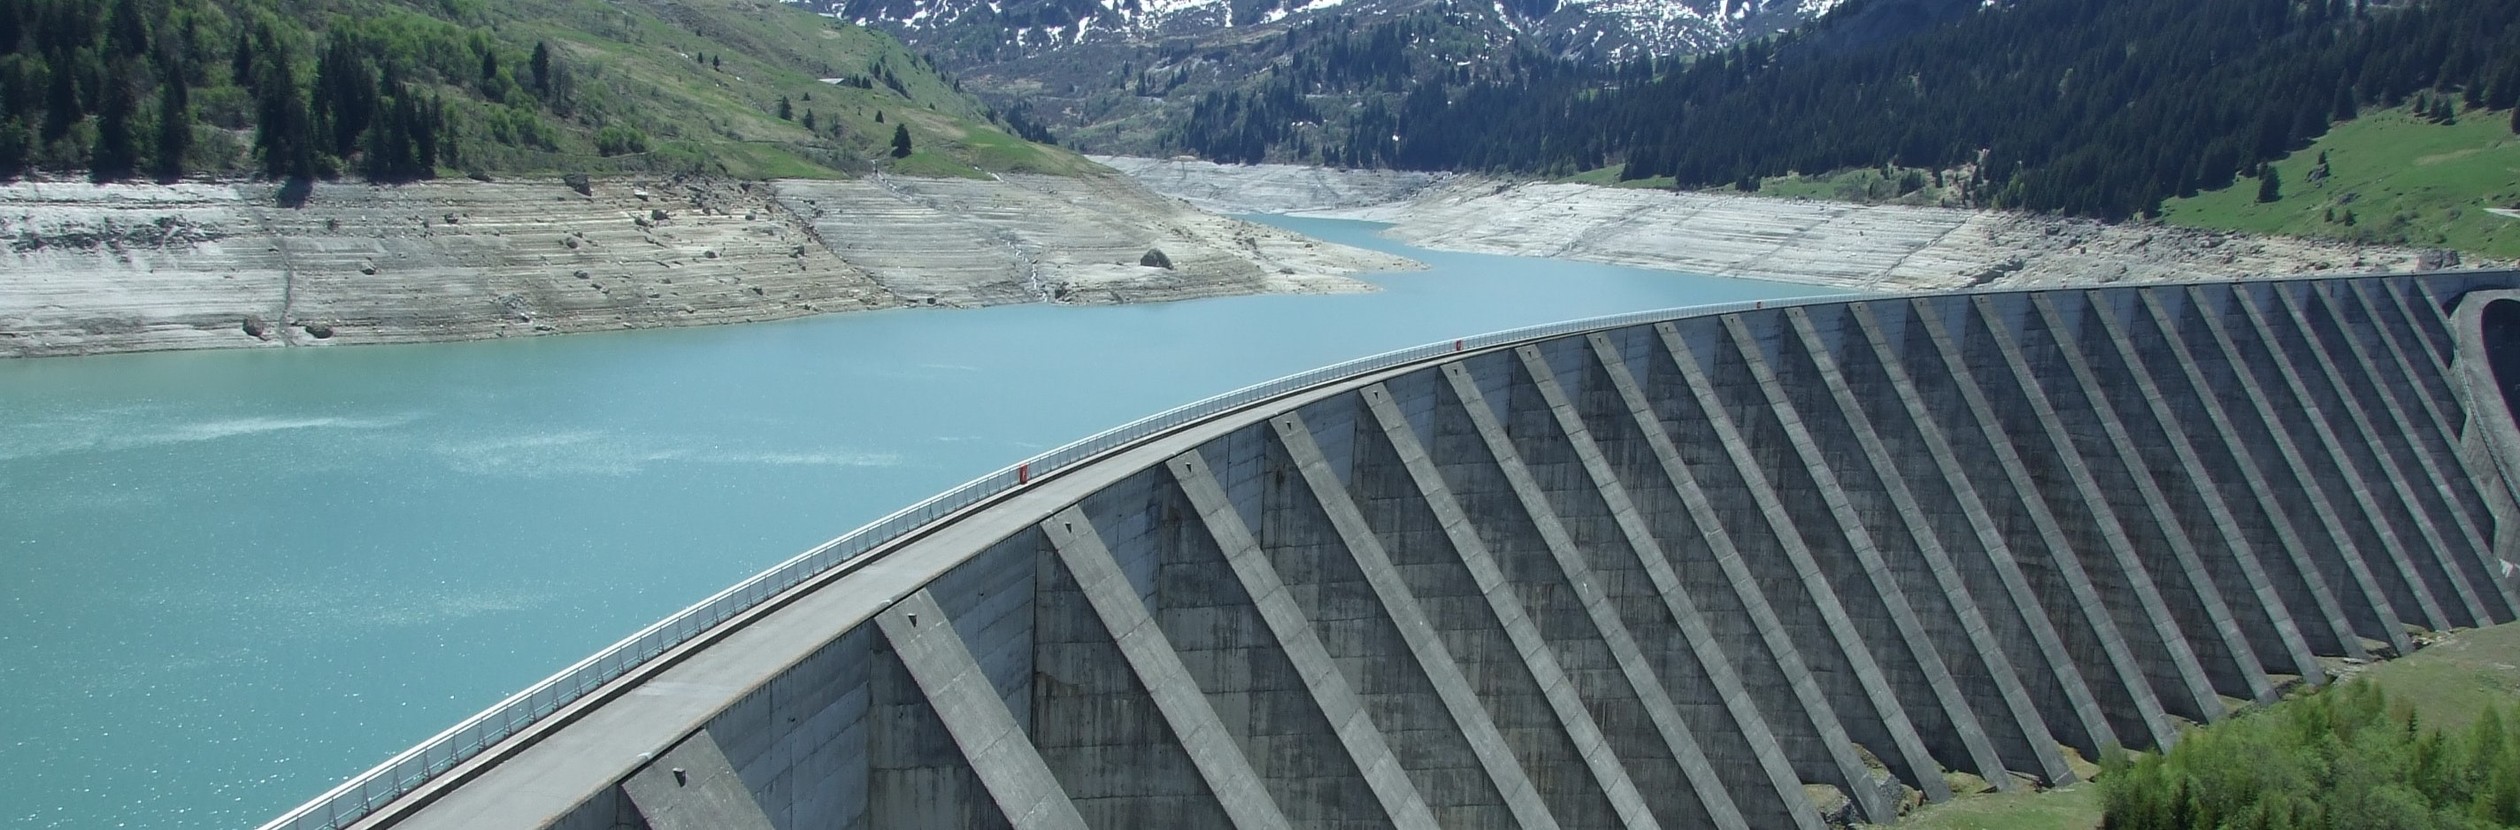 Dam-for-Hydro-electric-power-generation